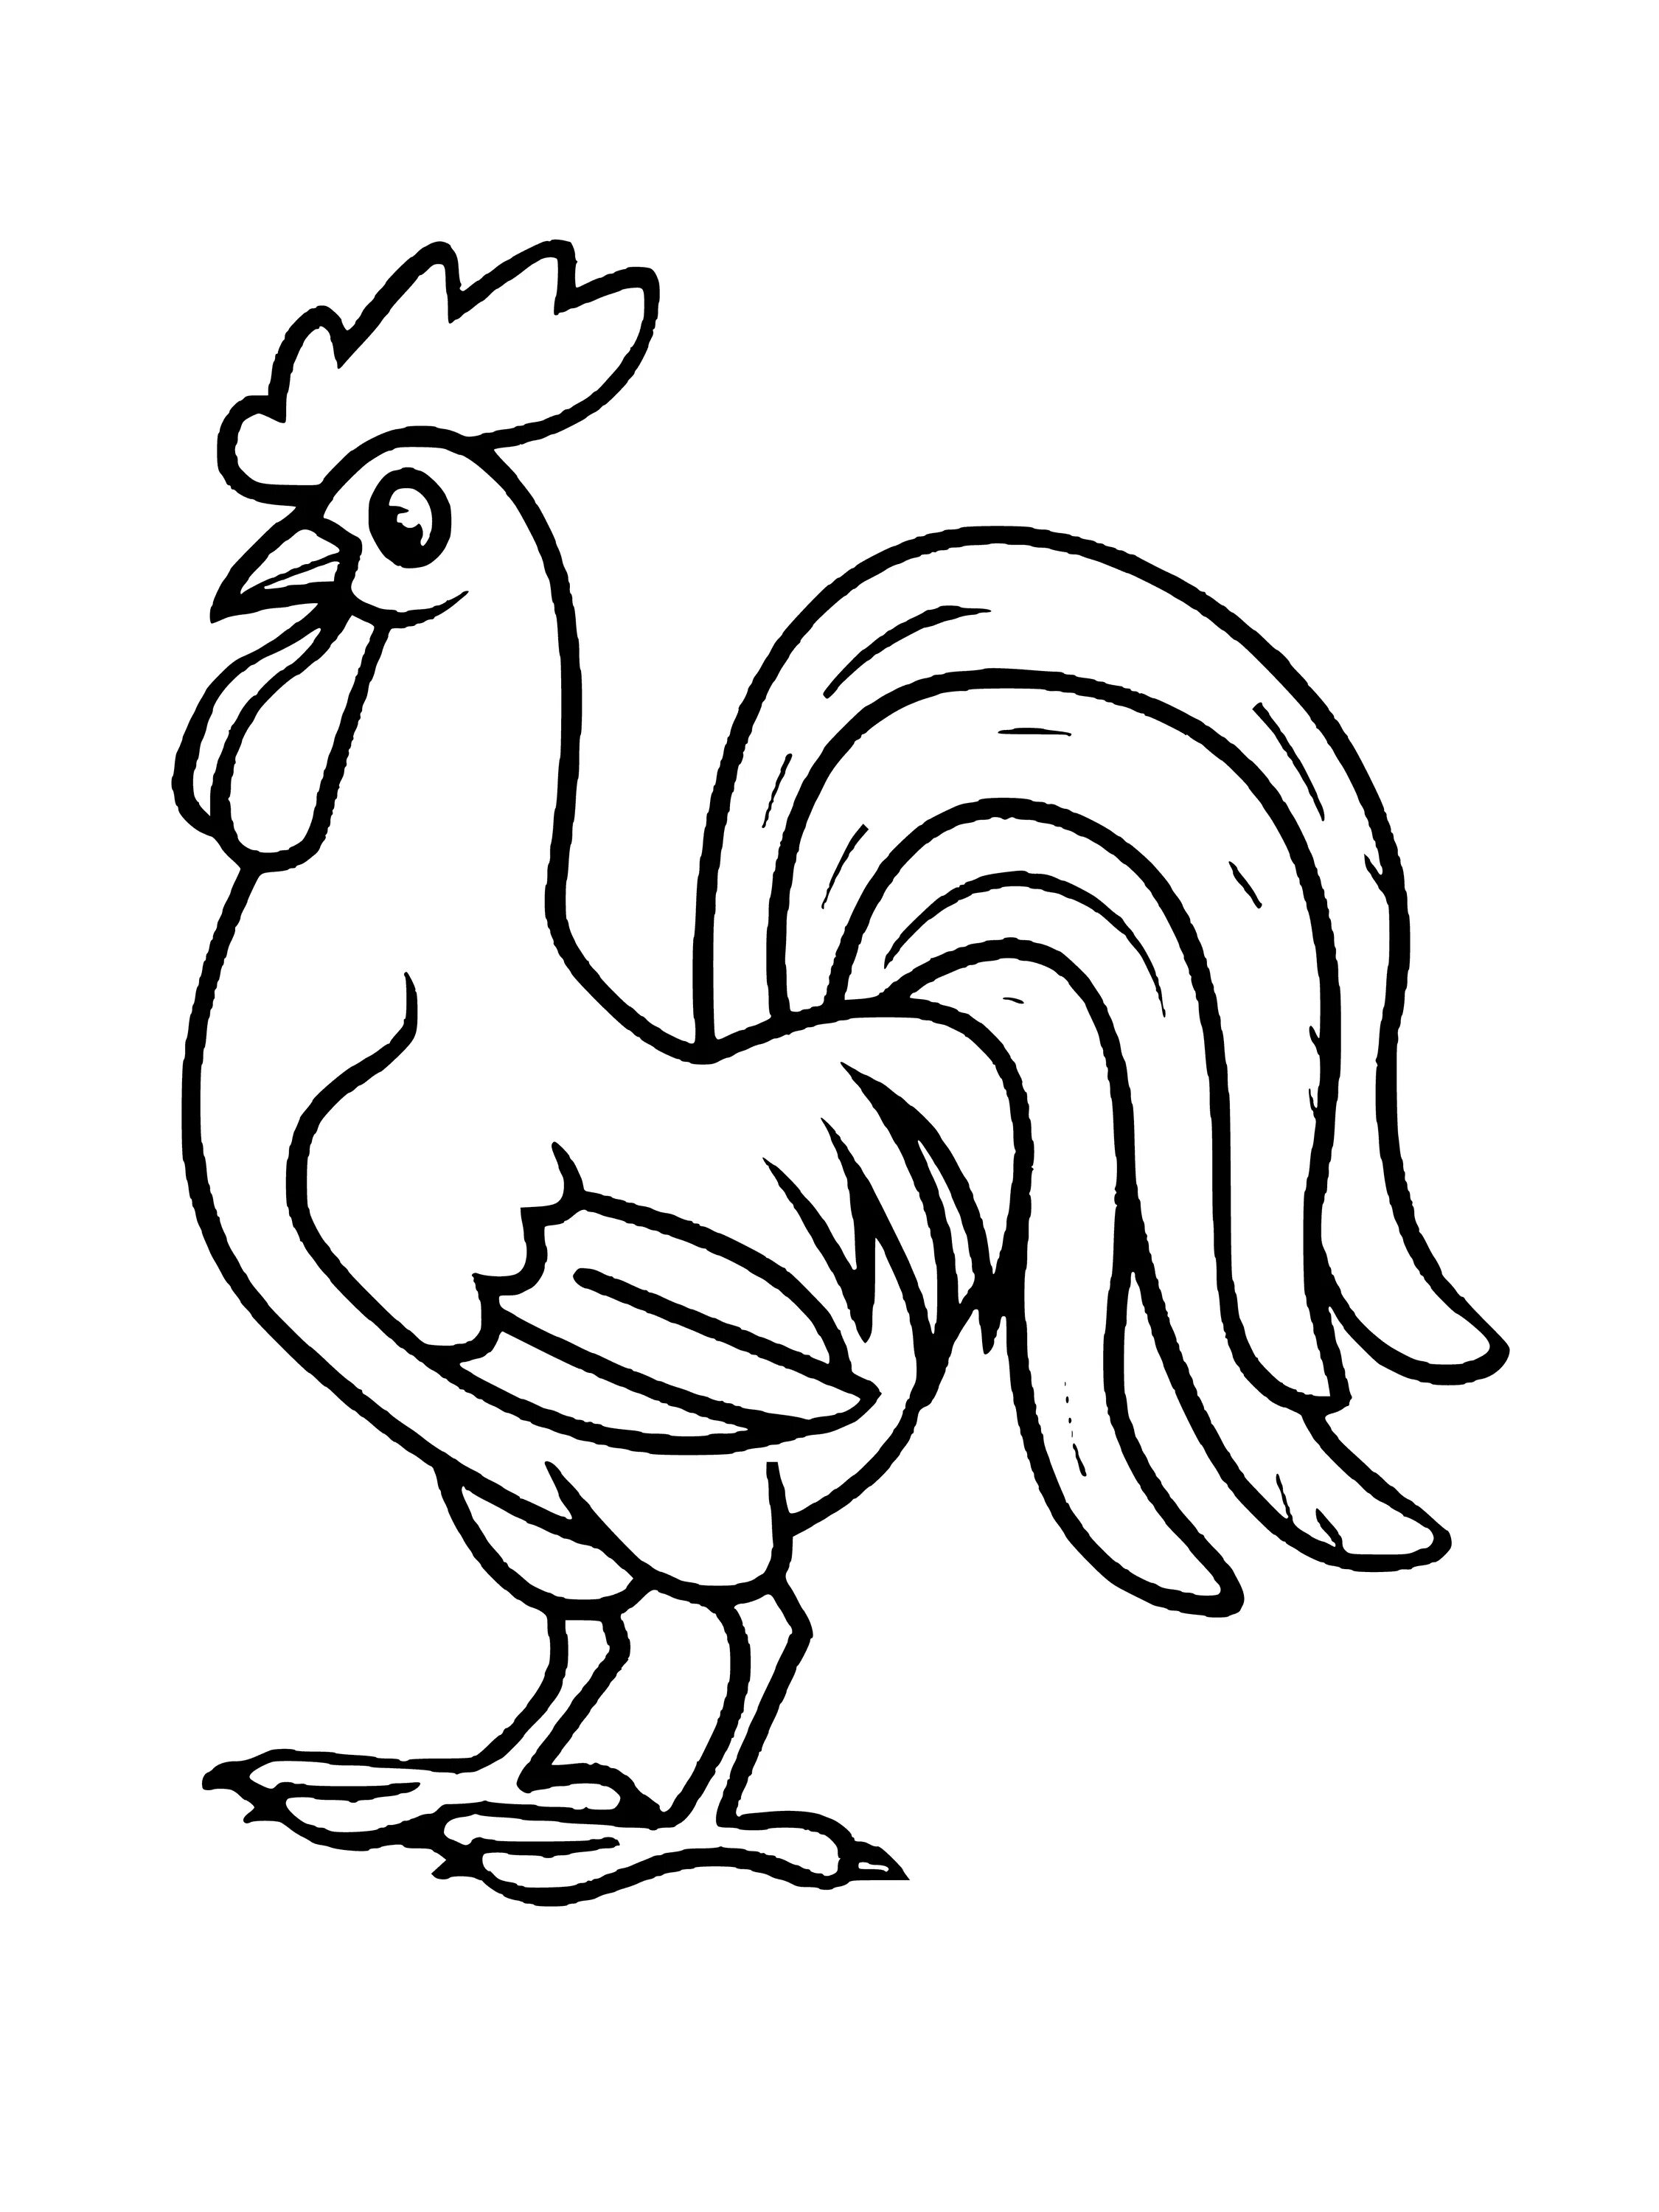 Coloring book glowing rooster for kids